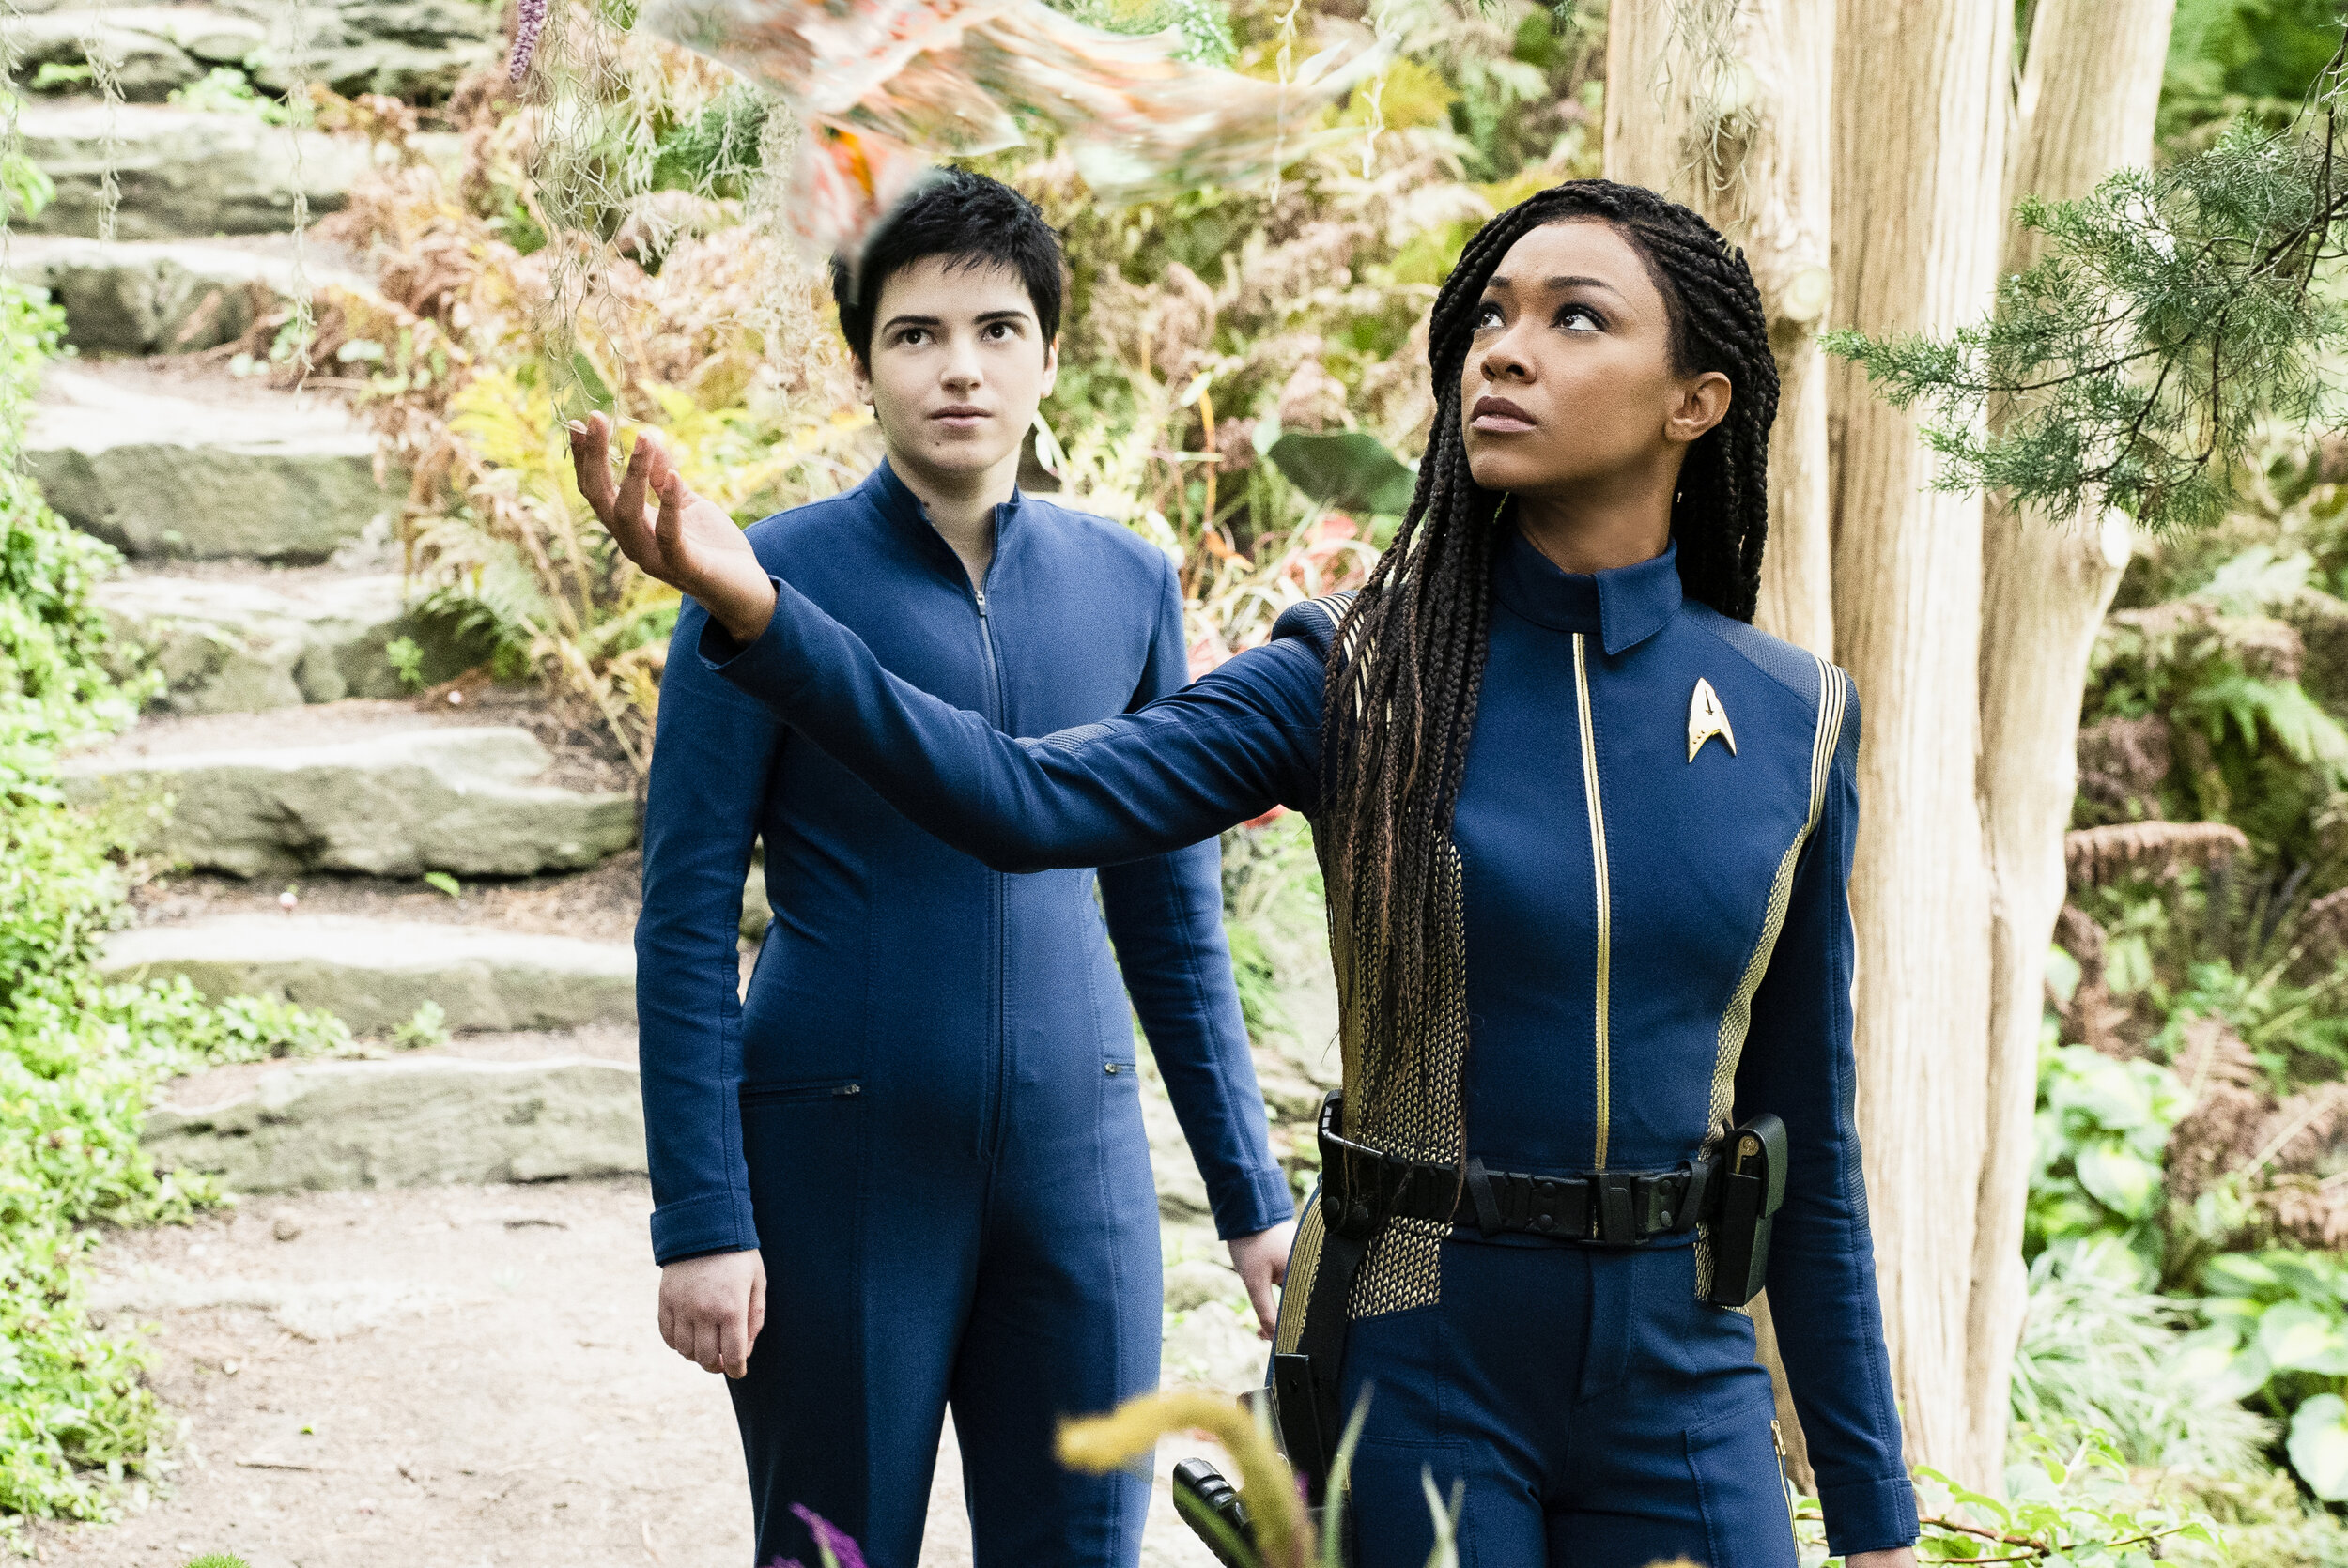   "Forget Me Not" -- Ep#304 -- Pictured: Blu del Barrio as Adira and Sonequa Martin-Green as Burnham of the CBS All Access series STAR TREK: DISCOVERY. Photo Cr: Michael Gibson/CBS ©2020 CBS Interactive, Inc. All Rights Reserved.  